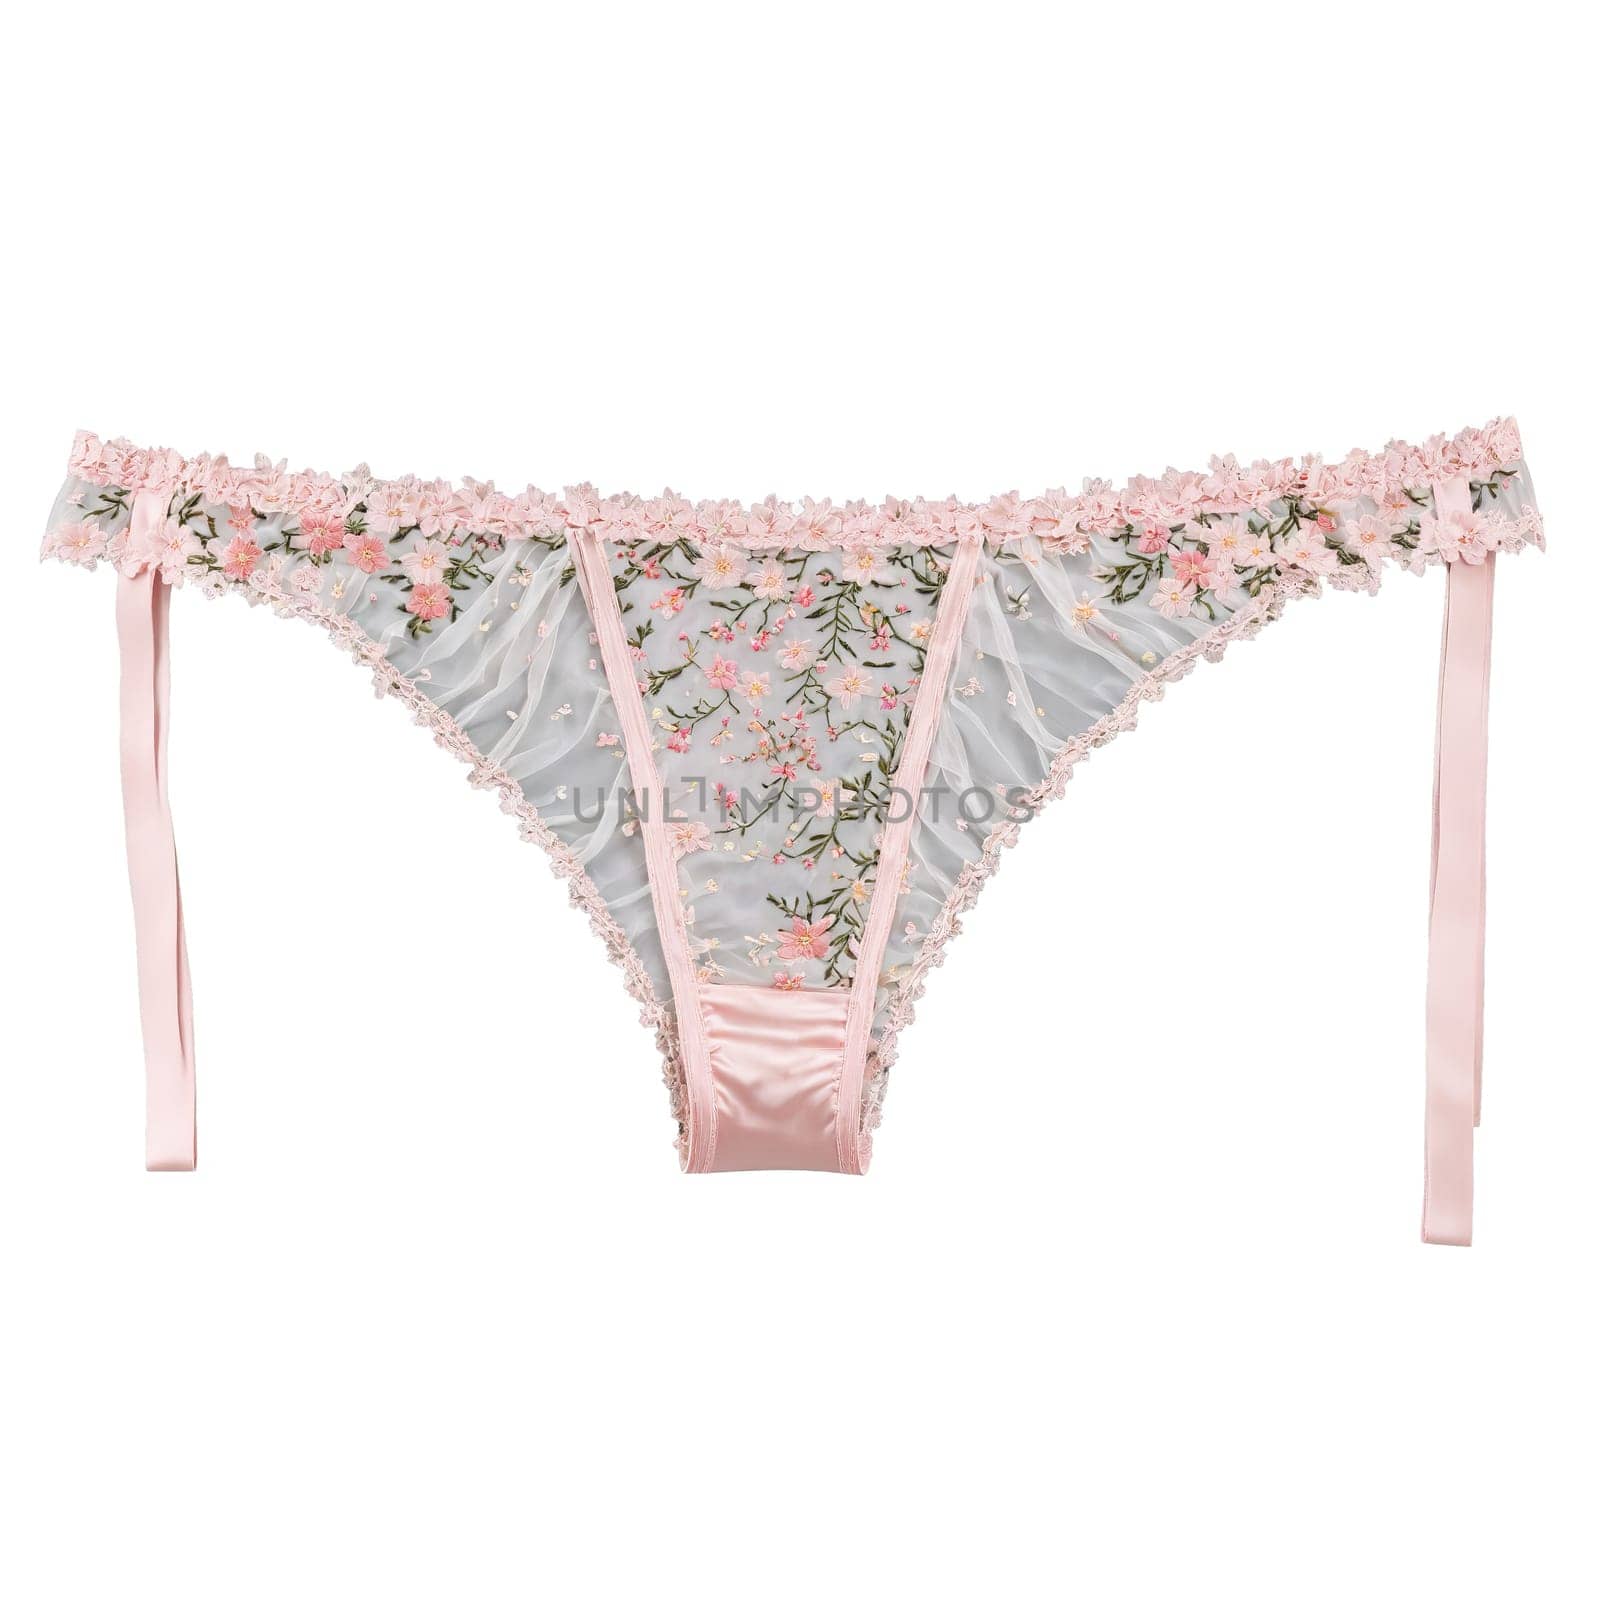 Floral Blush pink garter belt with delicate floral embroidery on soft even lighting romantic pastel by panophotograph